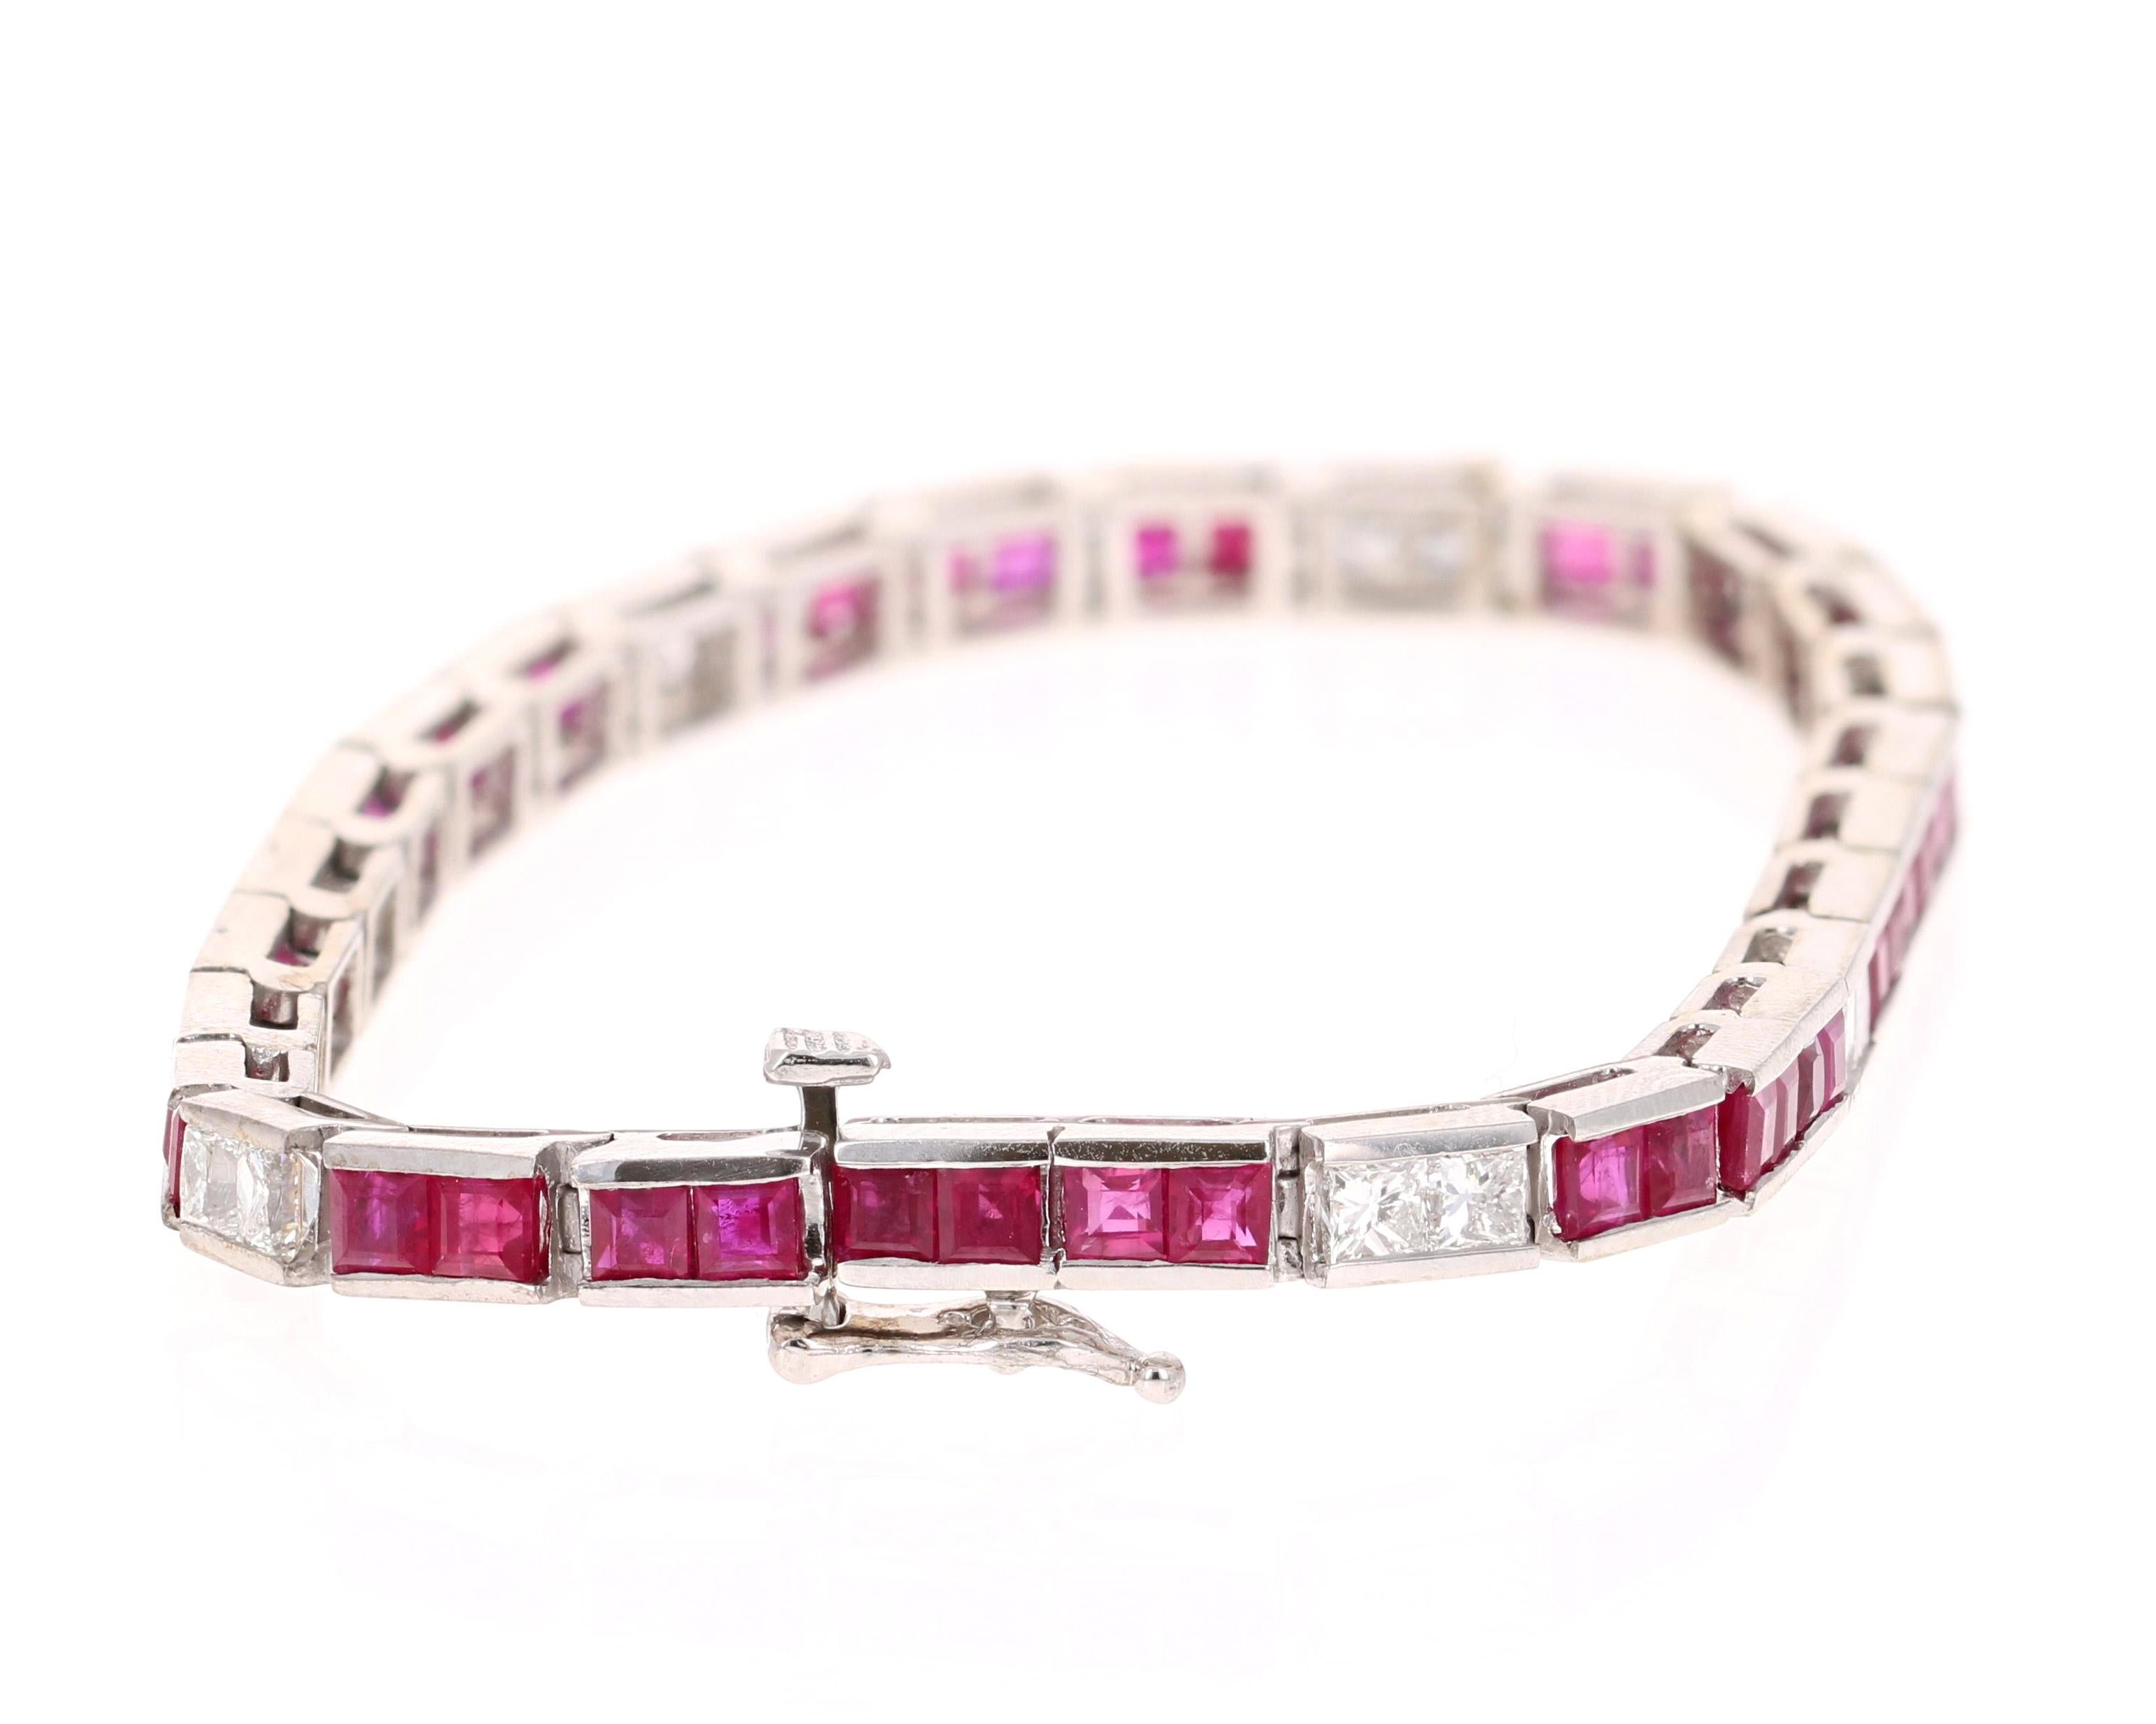 Beautiful Ruby Diamond Bracelet! 

This Bracelet has 44 Natural Princess Cut Rubies that weigh 8.07 Carats. It also has 14 Princess Cut Diamonds that weigh 1.96 Carats. The total carat weight of the bracelet is 10.03 Carats. (Clarity: VS, Color: